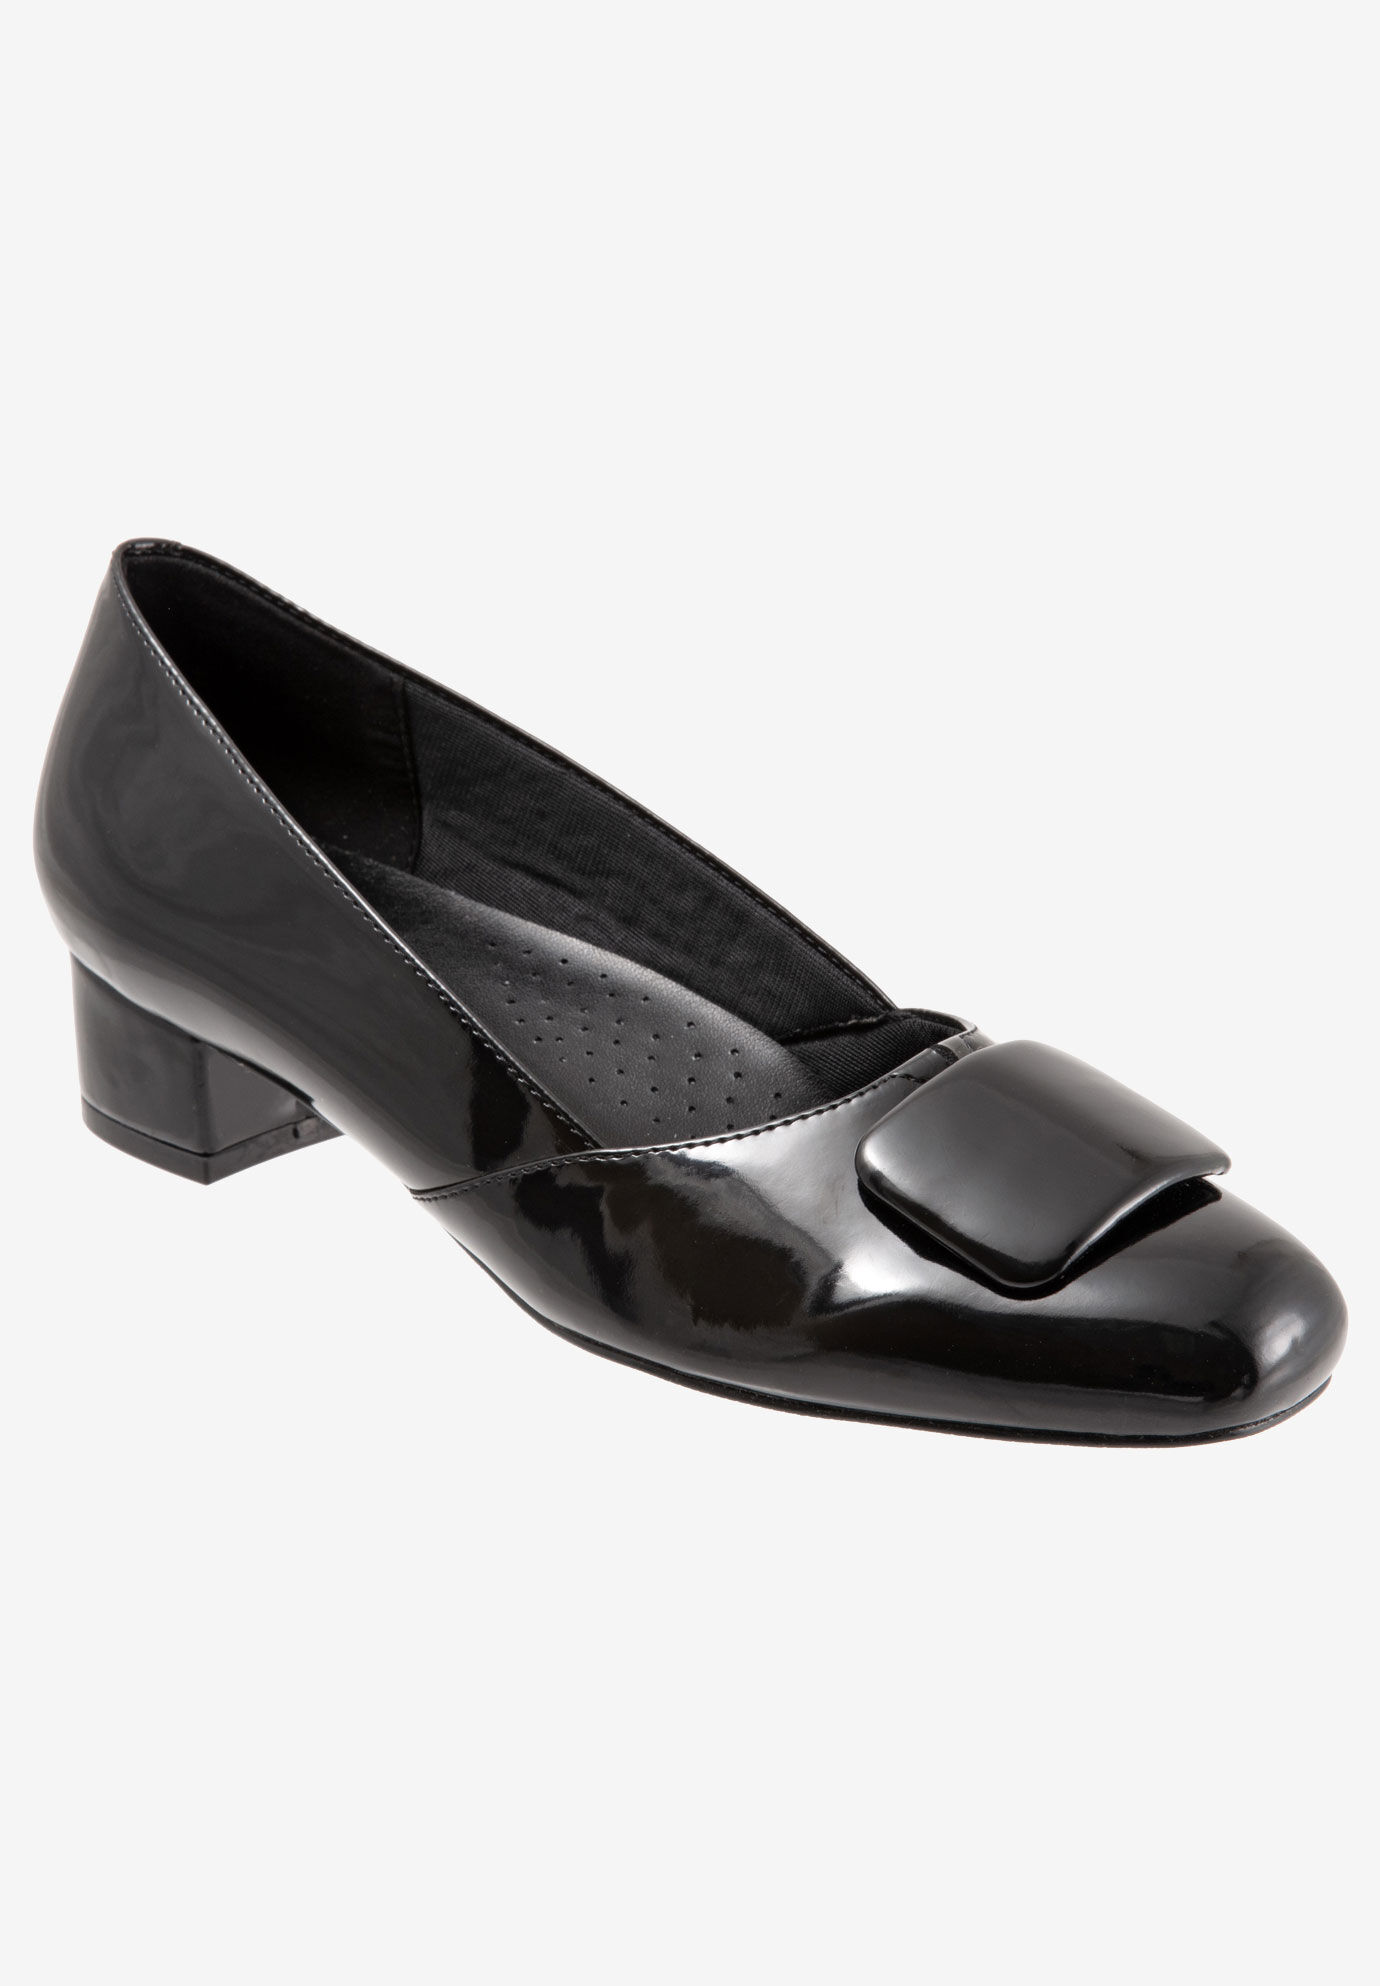 Extra Wide Width Women's Delse Pump by Trotters in Black Patent (Size 7 WW)